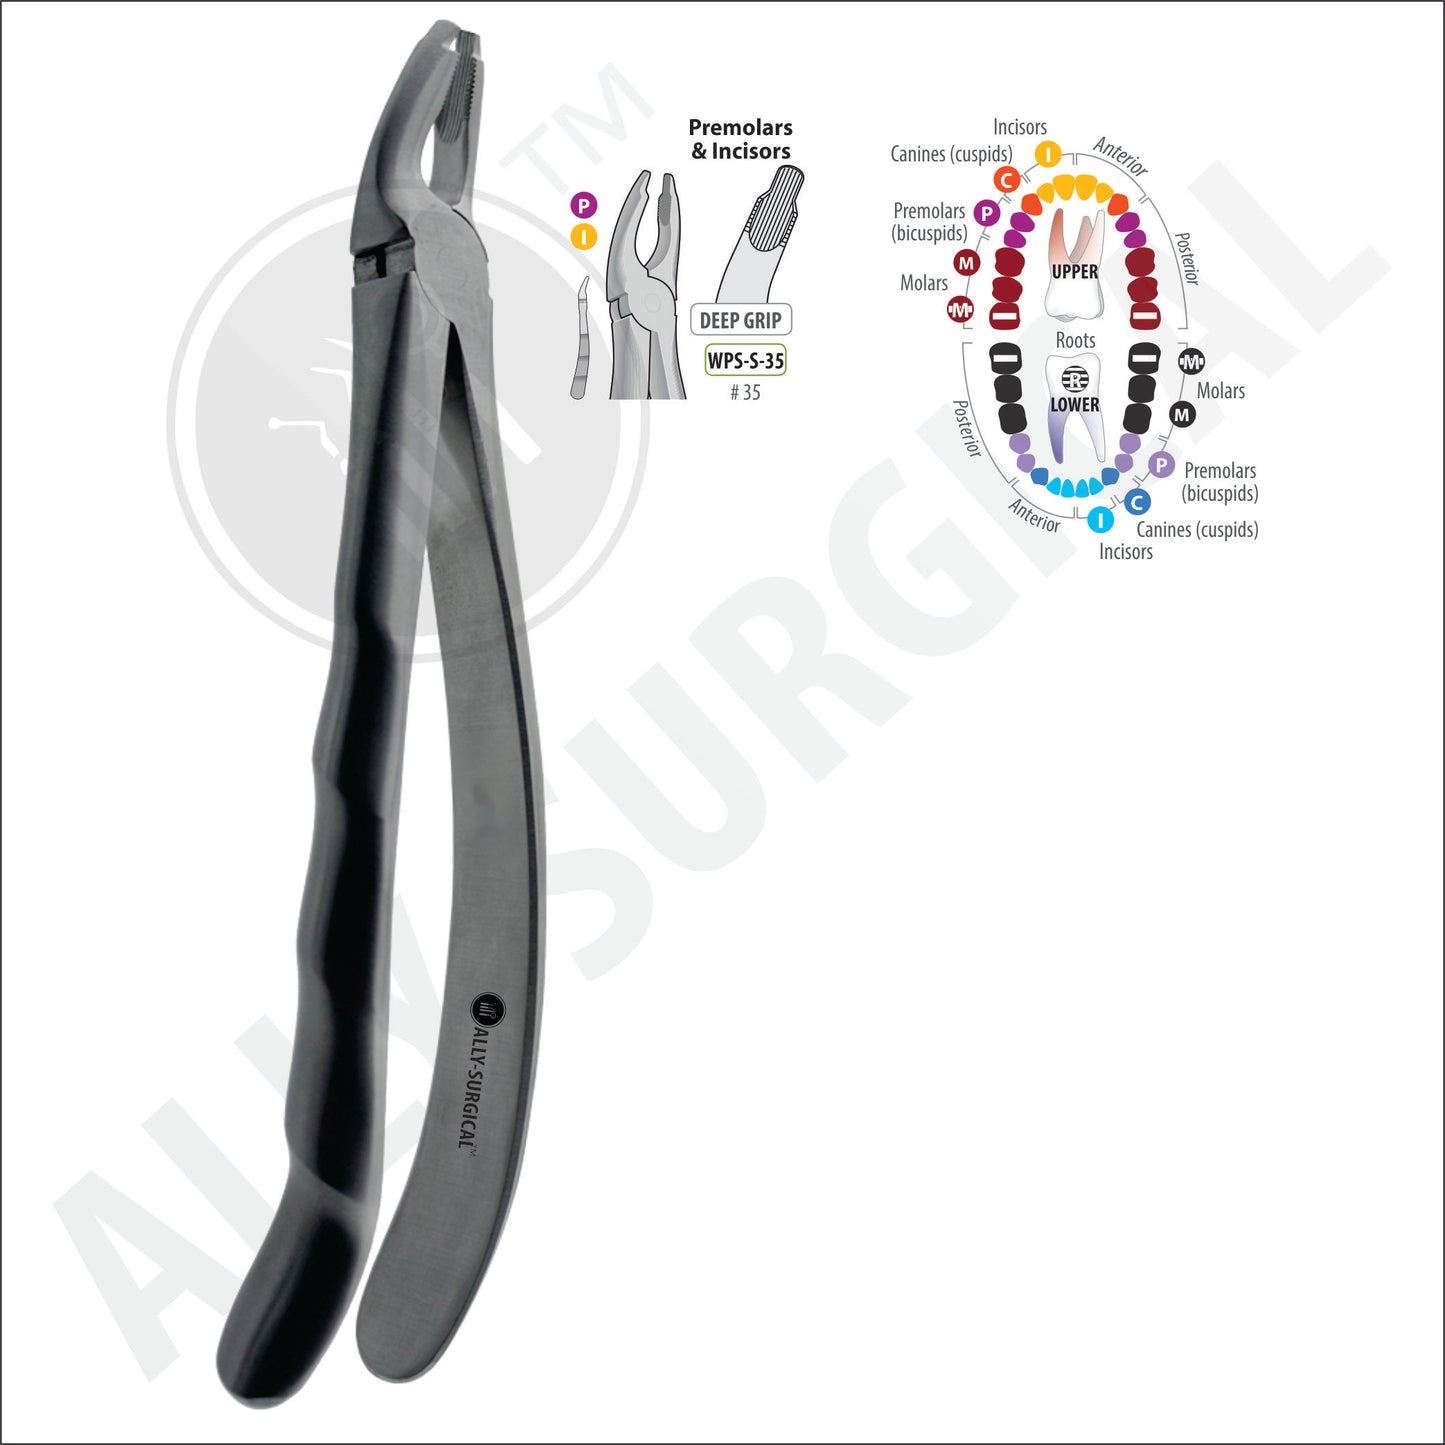 ANTERIOR INCISOR AND CANINE EXTRACTION FORCEPS #35